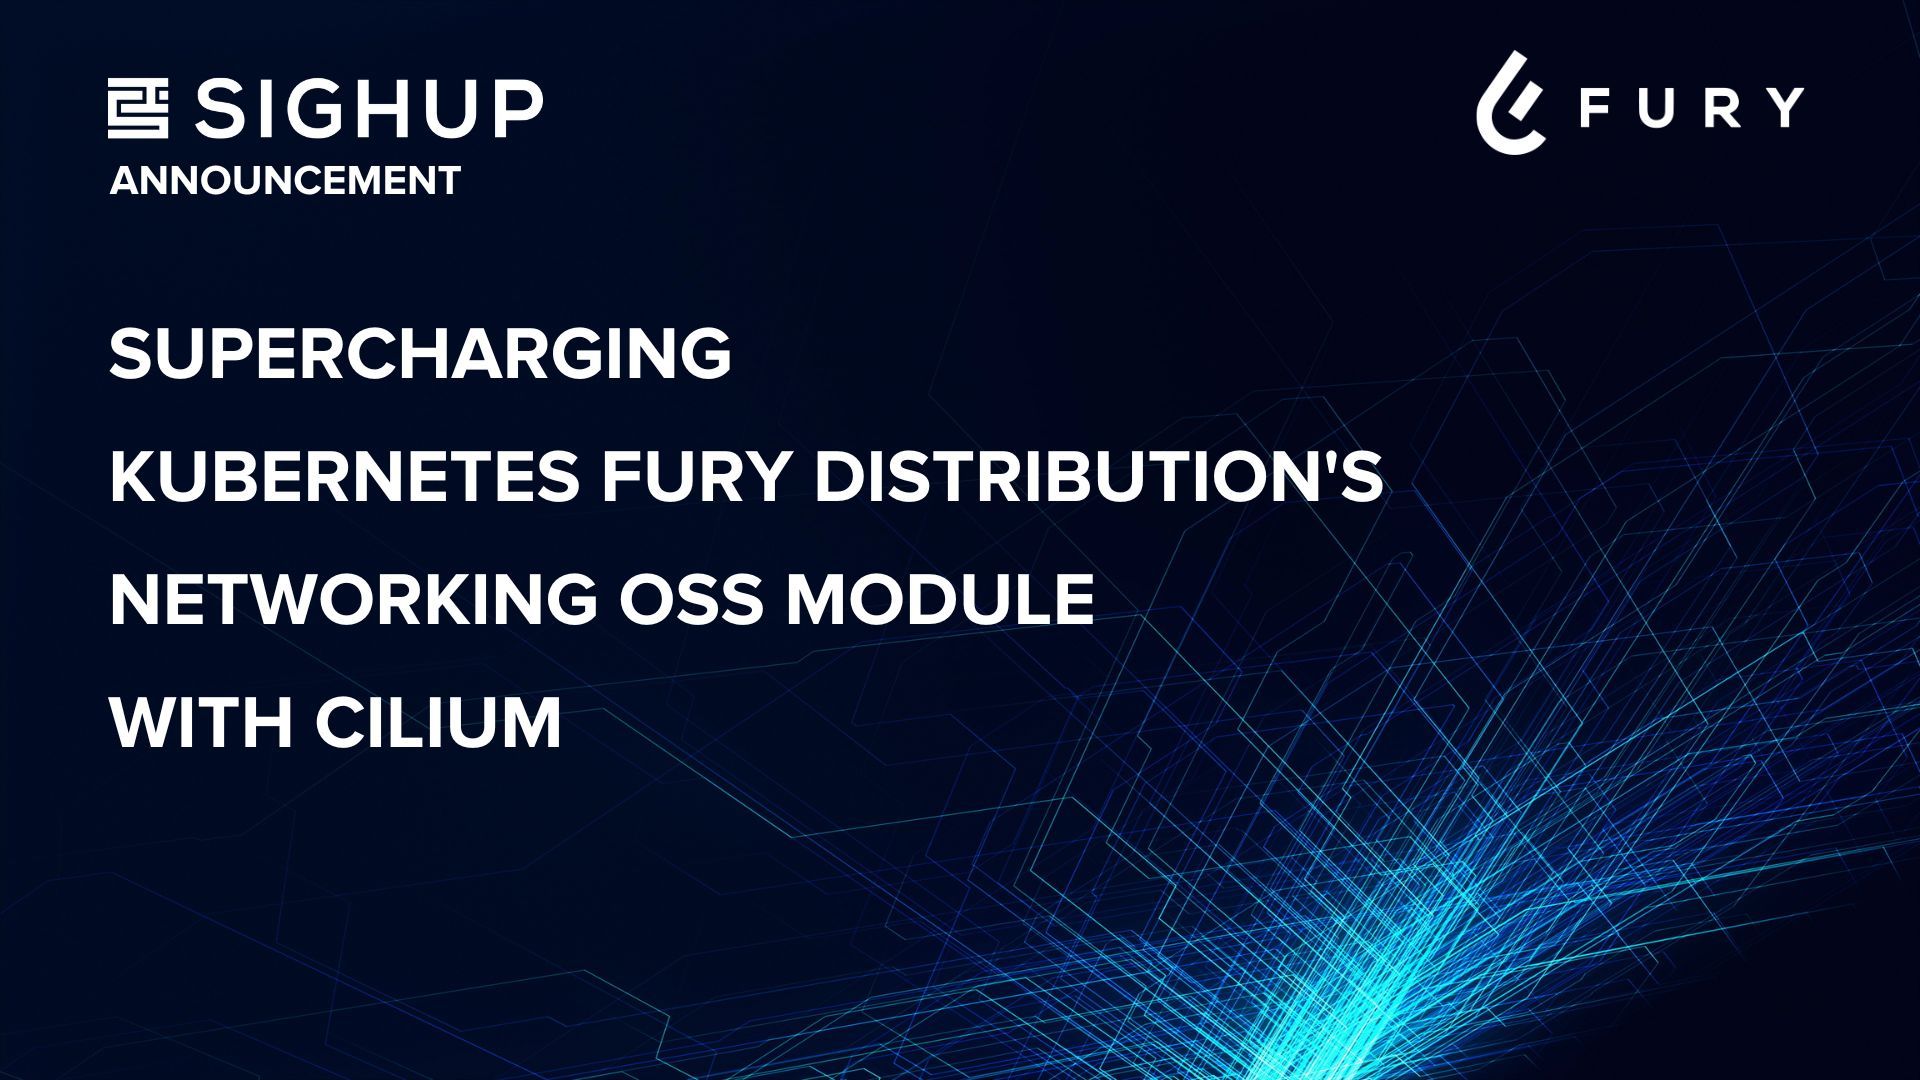 Supercharging Kubernetes Fury Distribution's Networking OSS Module with Cilium